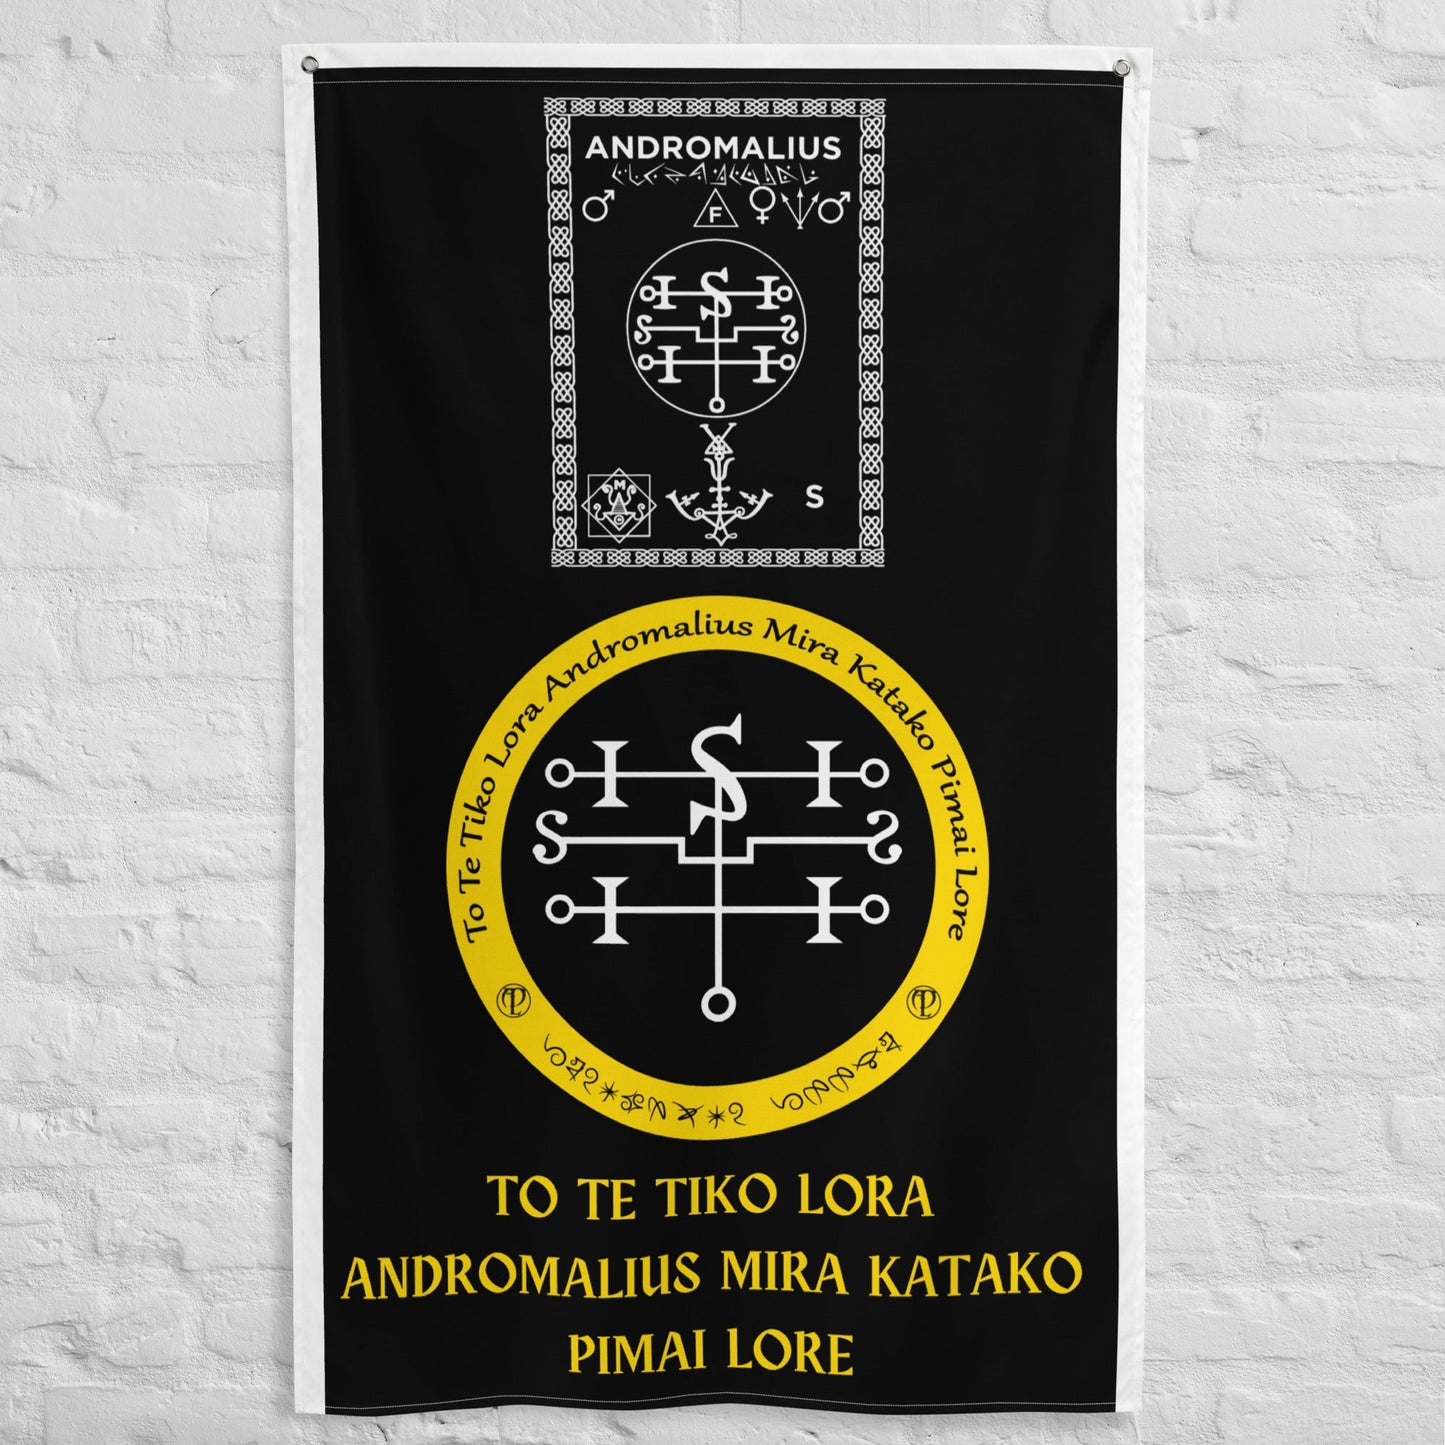 Attunement-Invocation-Flag-of-Spirit-Andromalius-To-make-your-attunements-and-invocations-ງ່າຍ ແລະ ໄວ